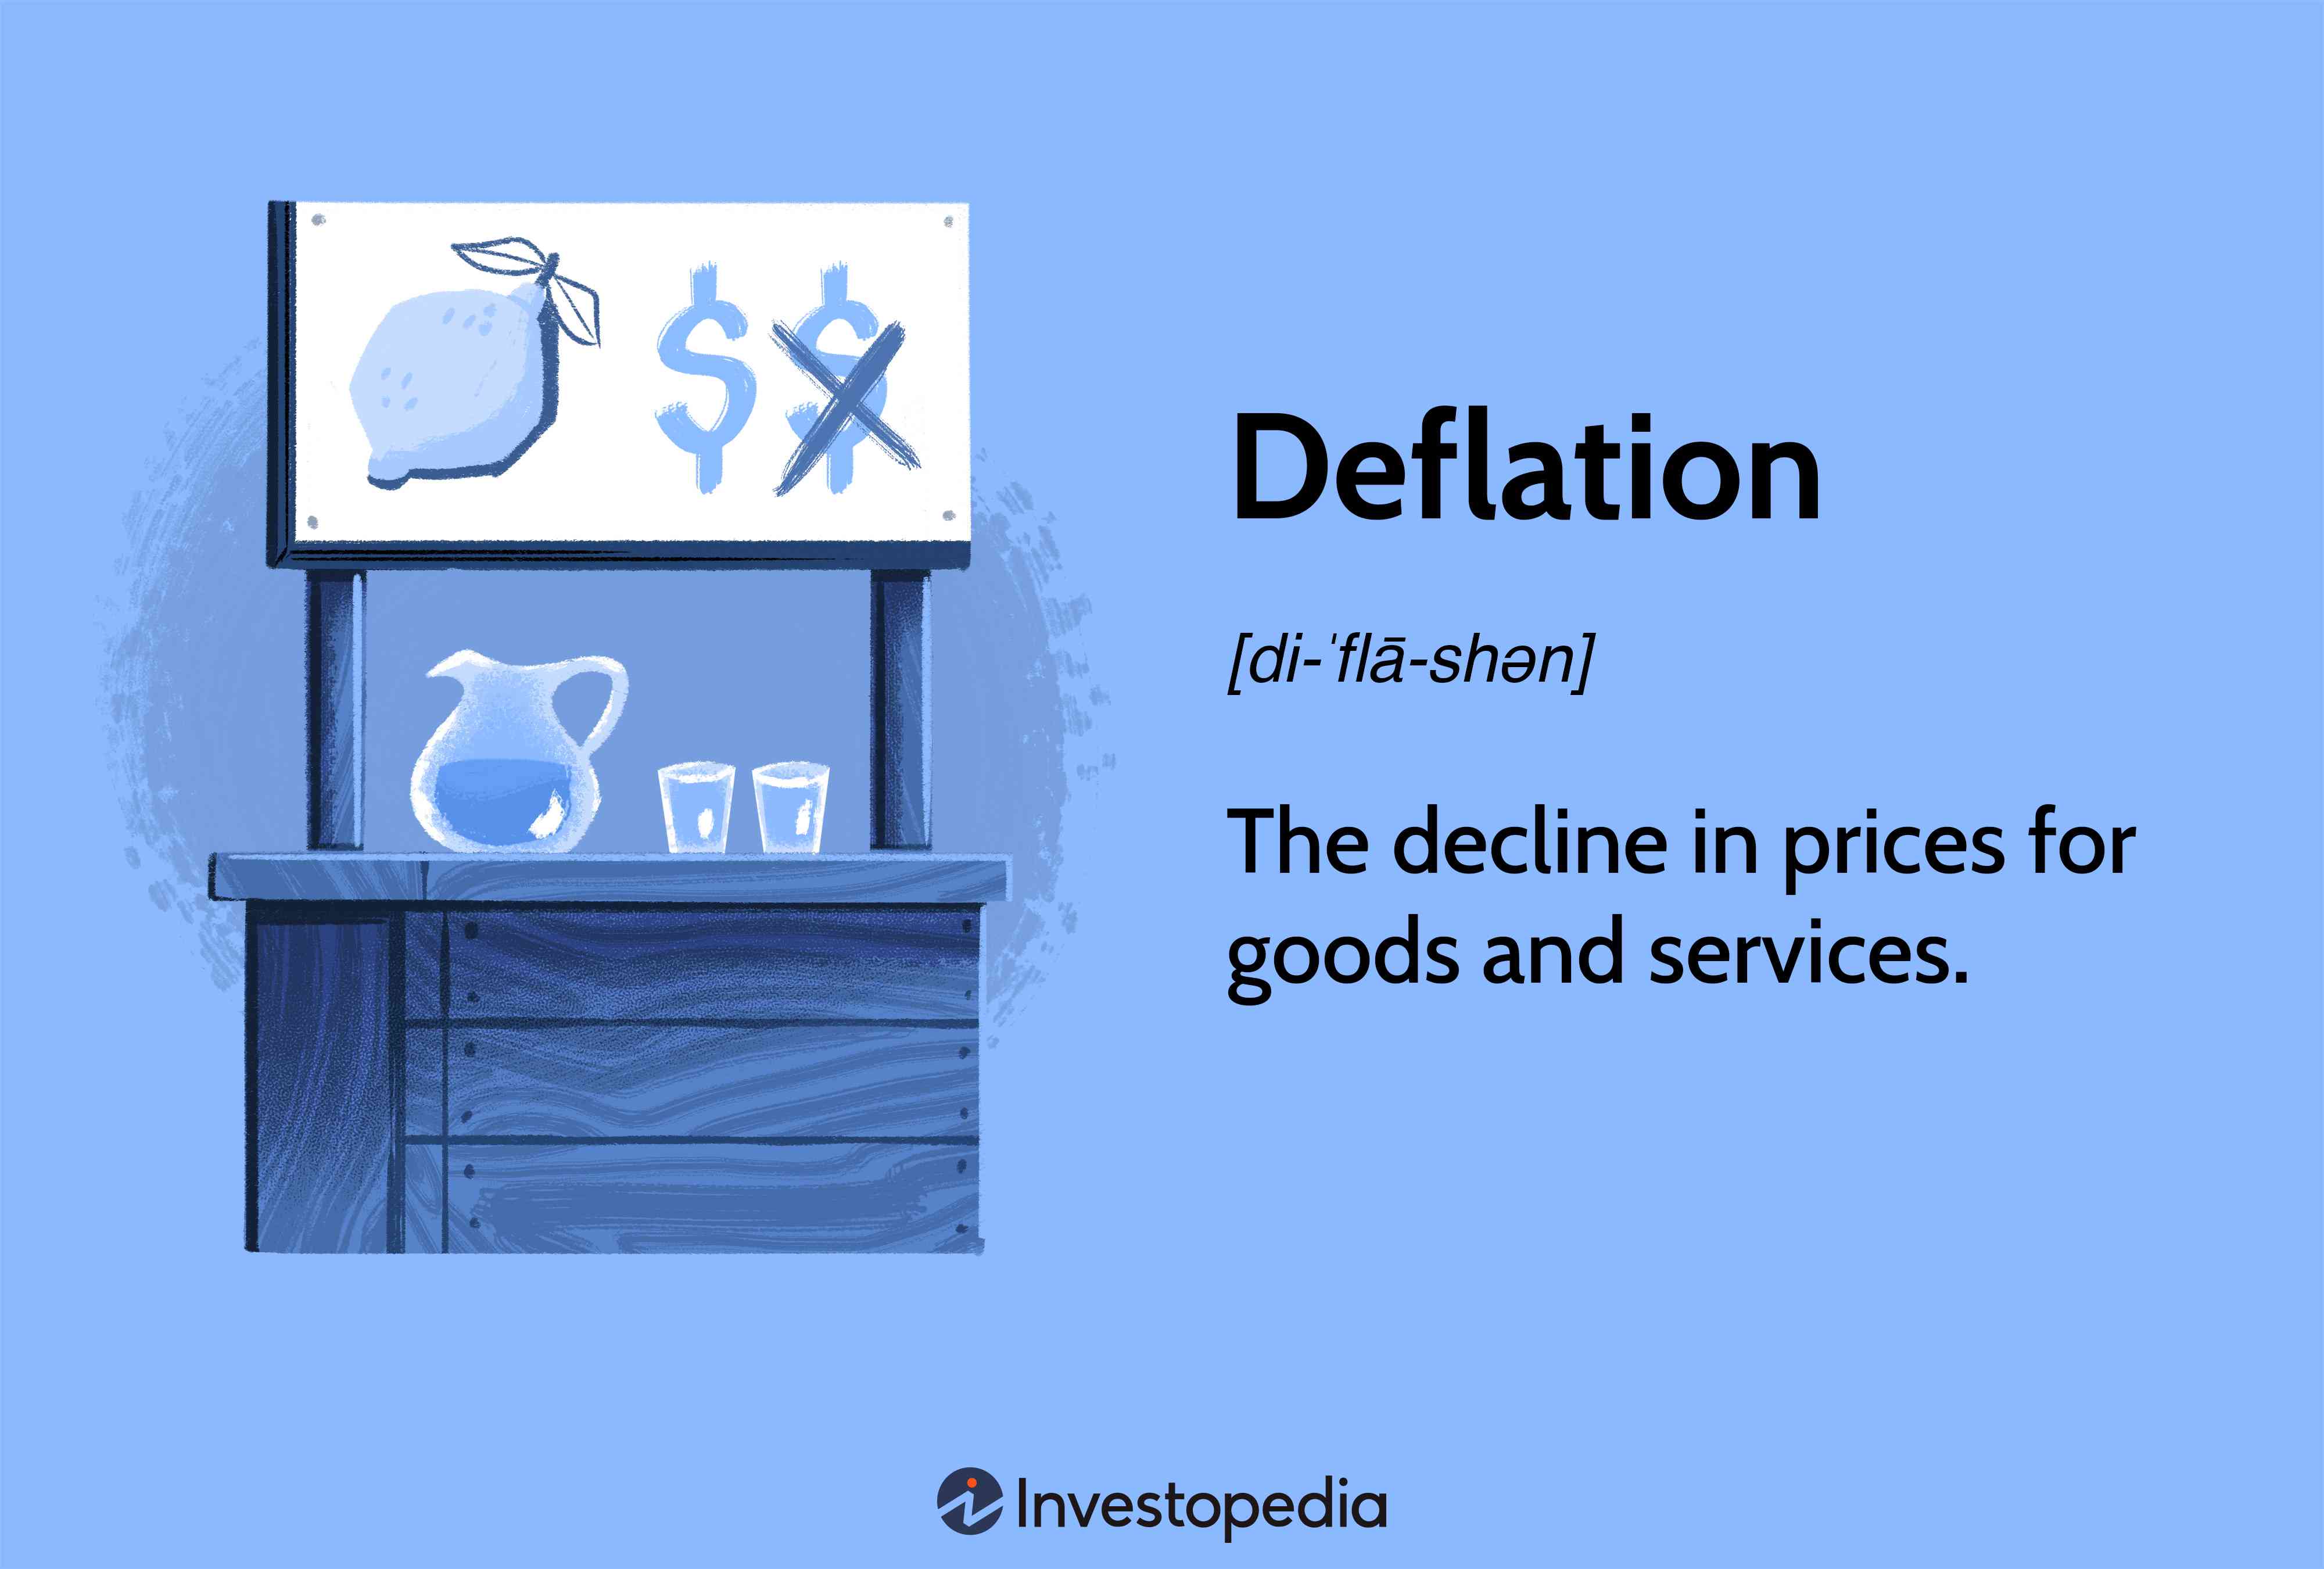 Deflation: The decline in prices for goods and services.